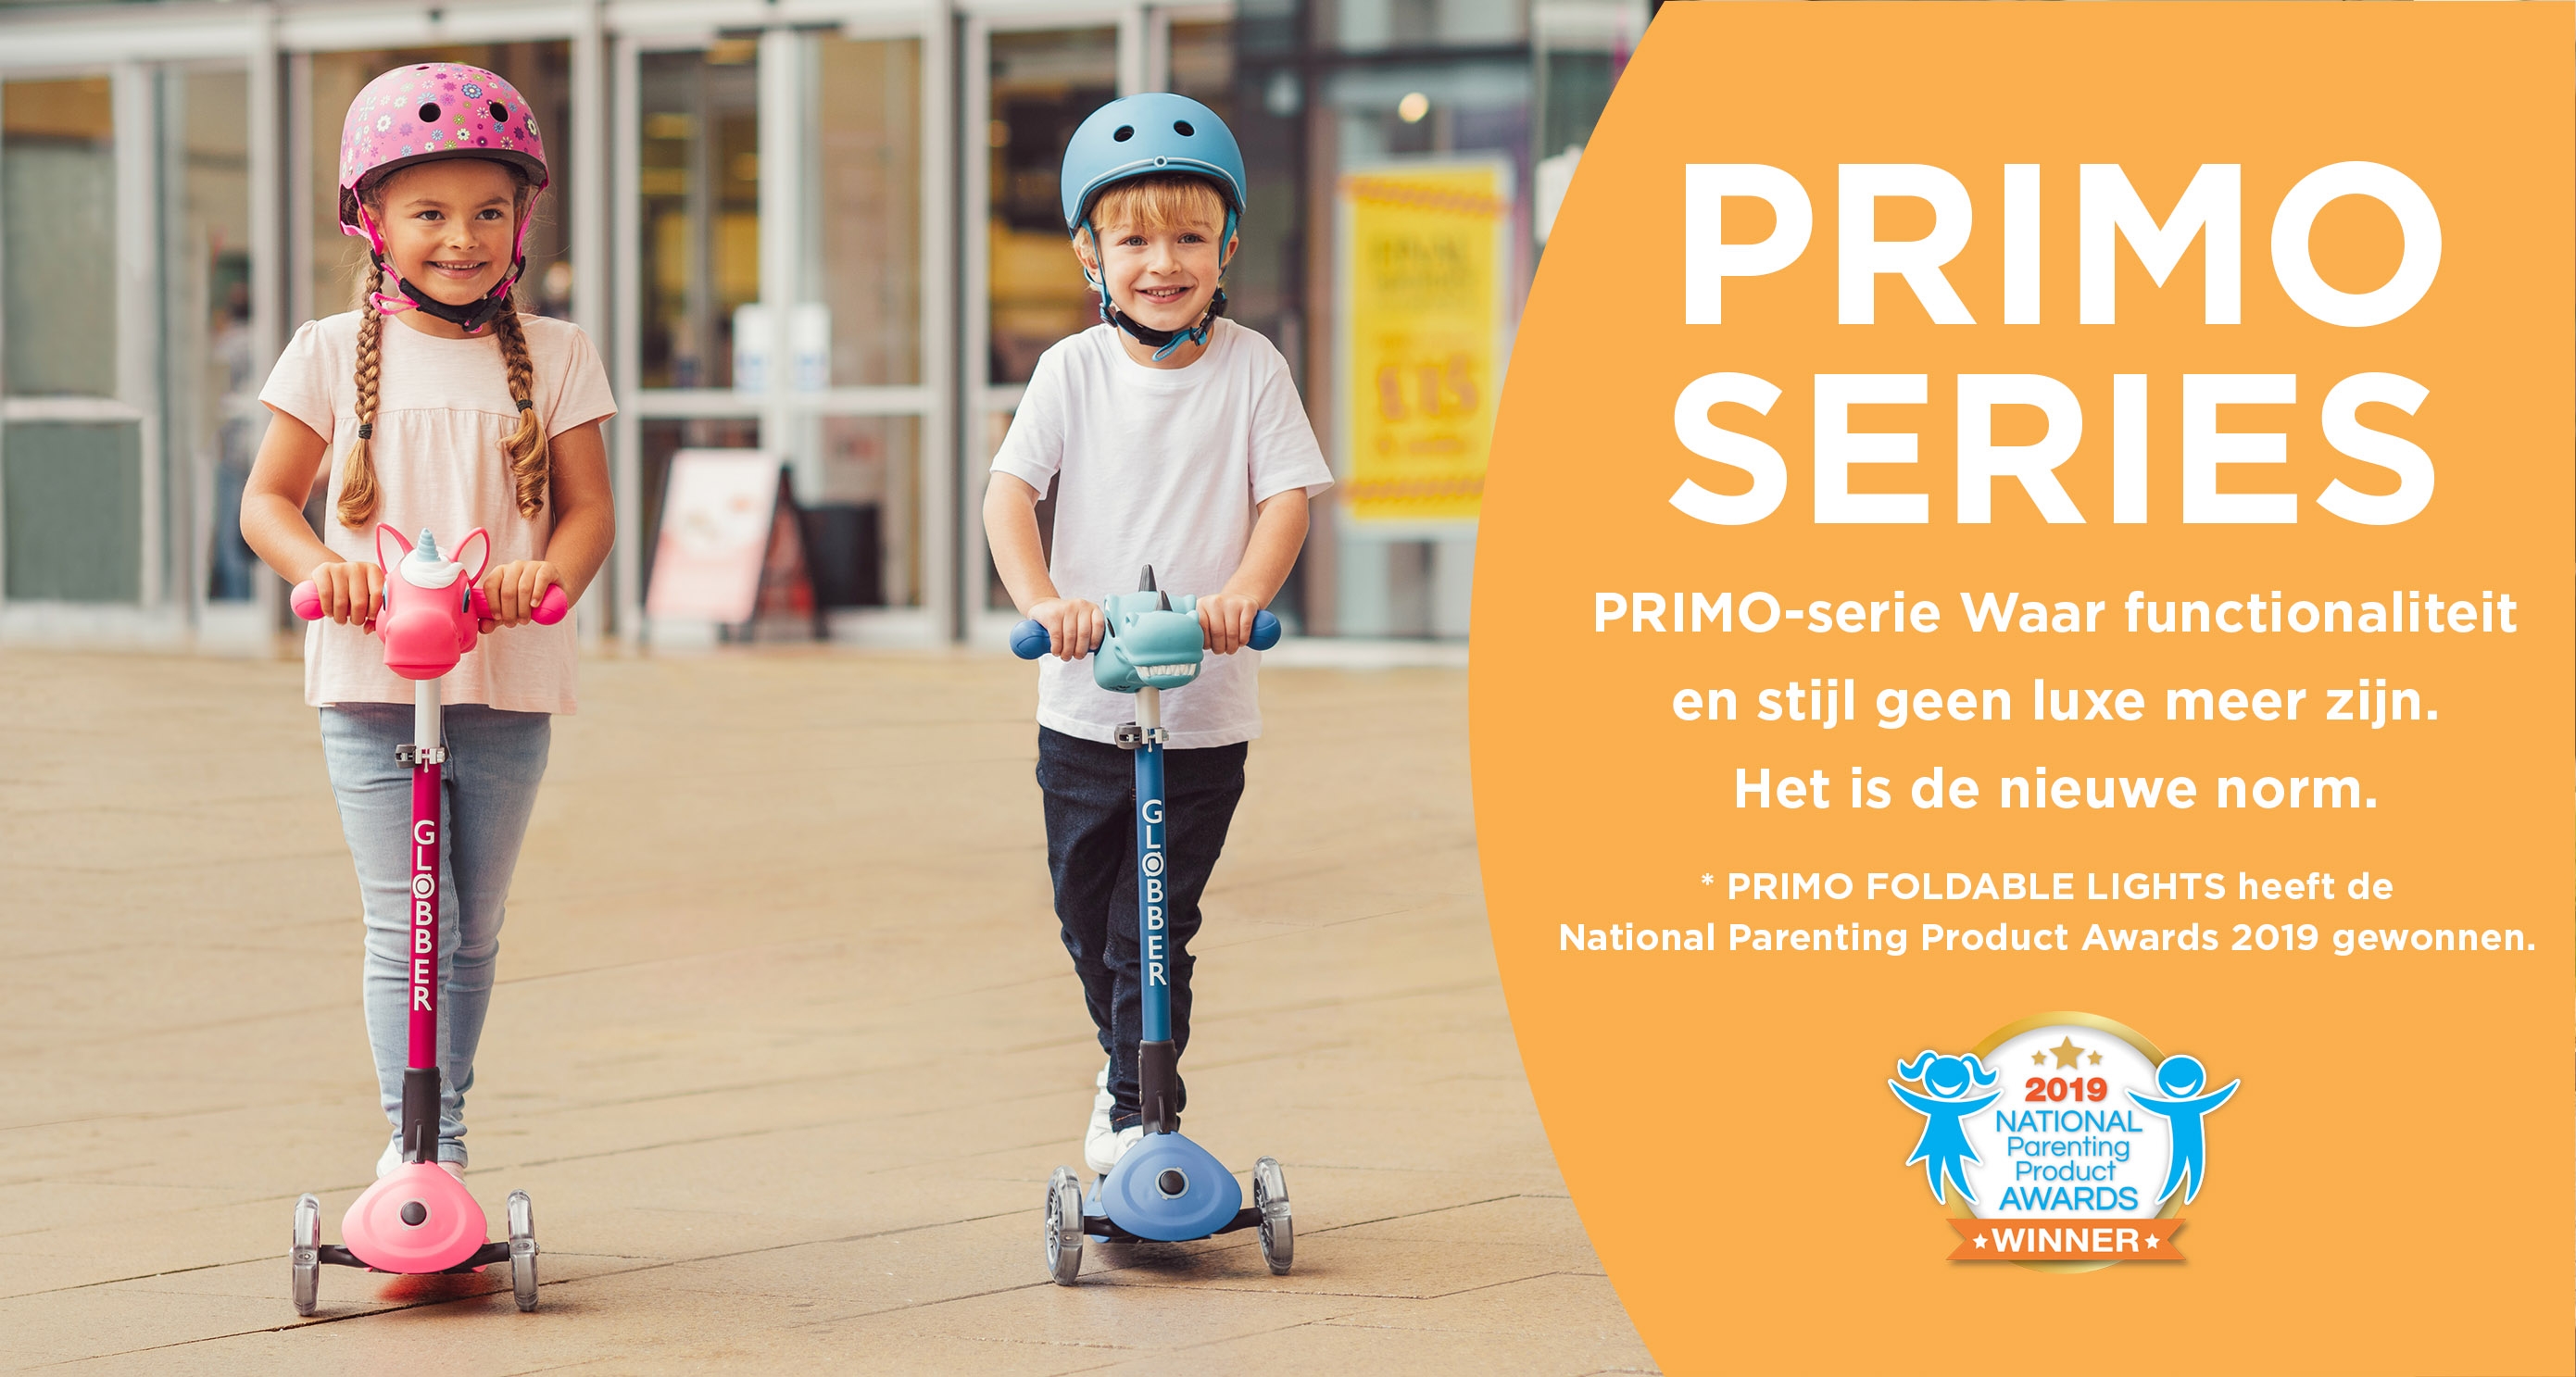 3 wheel adjustable scooters for kids